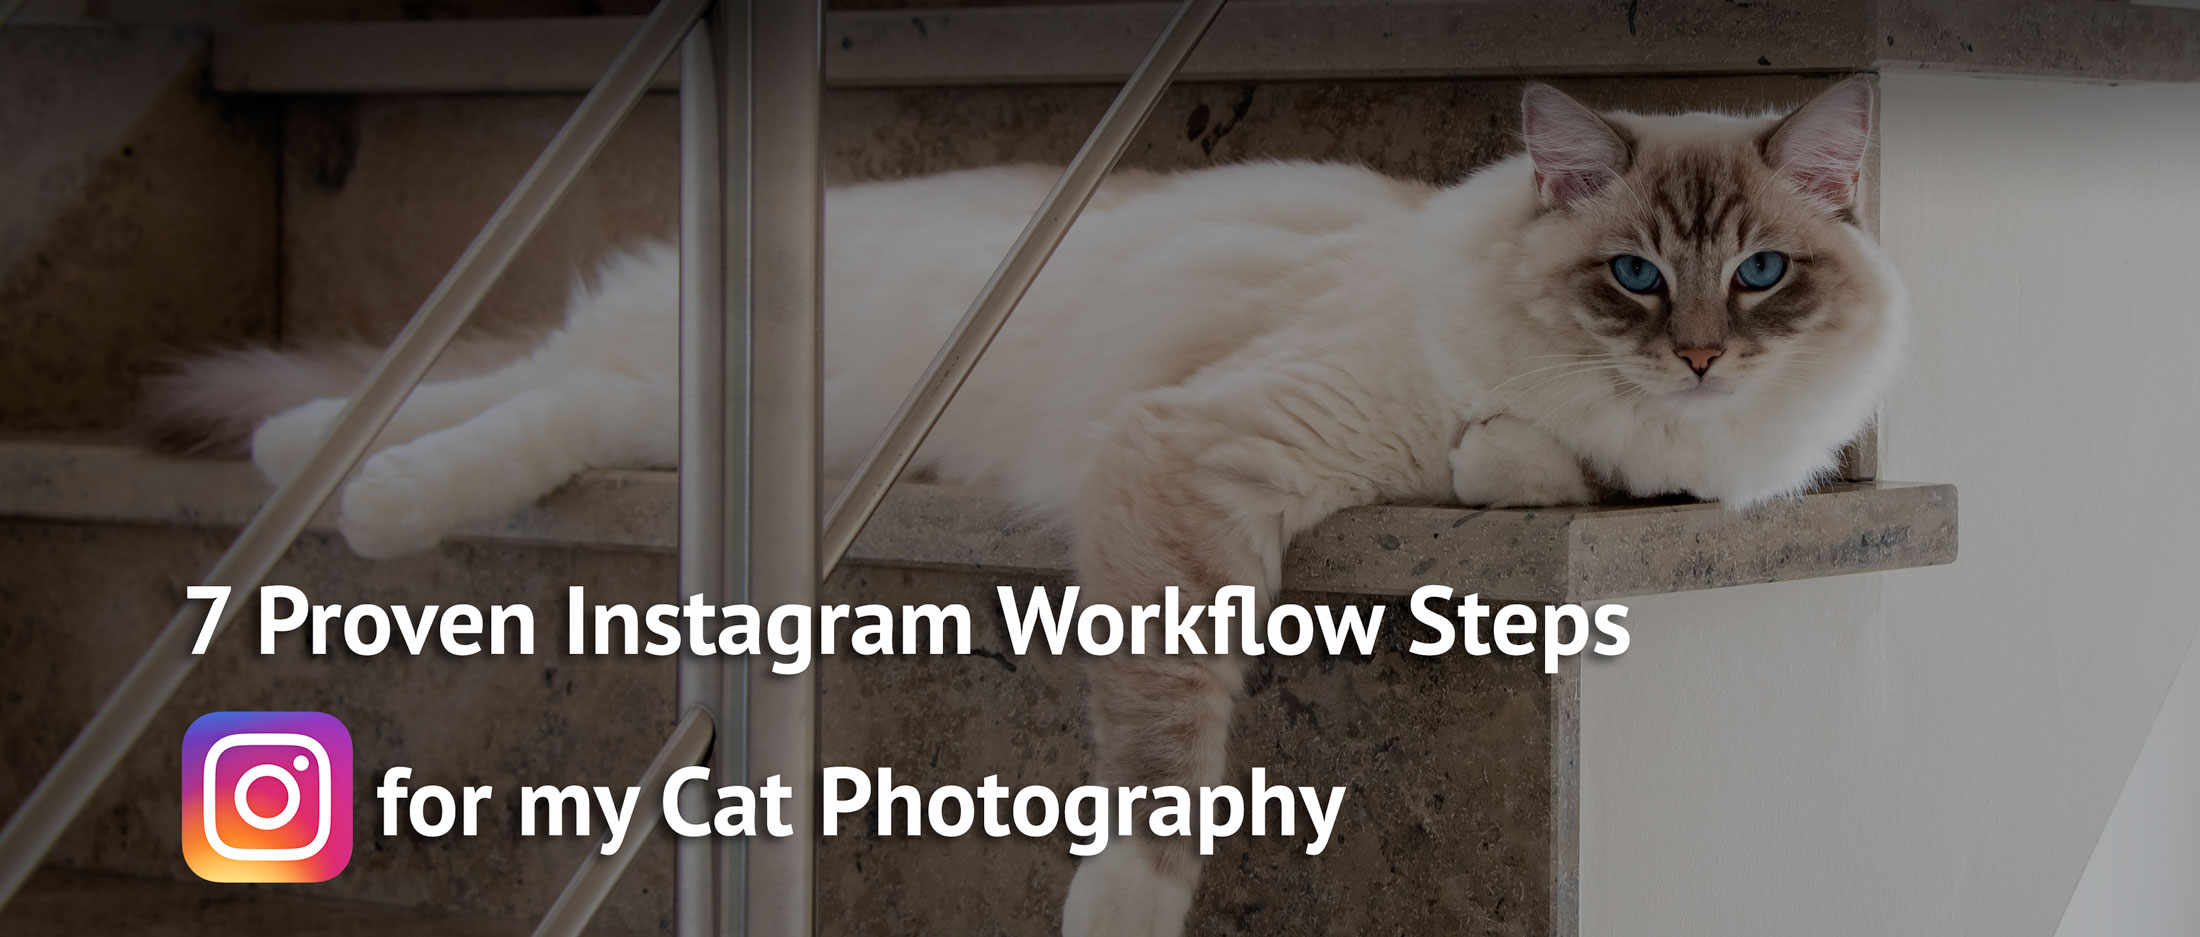 picture of ragdoll cat Casper lying on the stairs watching the camera as a model used as header photo for the blogpost 7 workflow steps for instagram cat photography